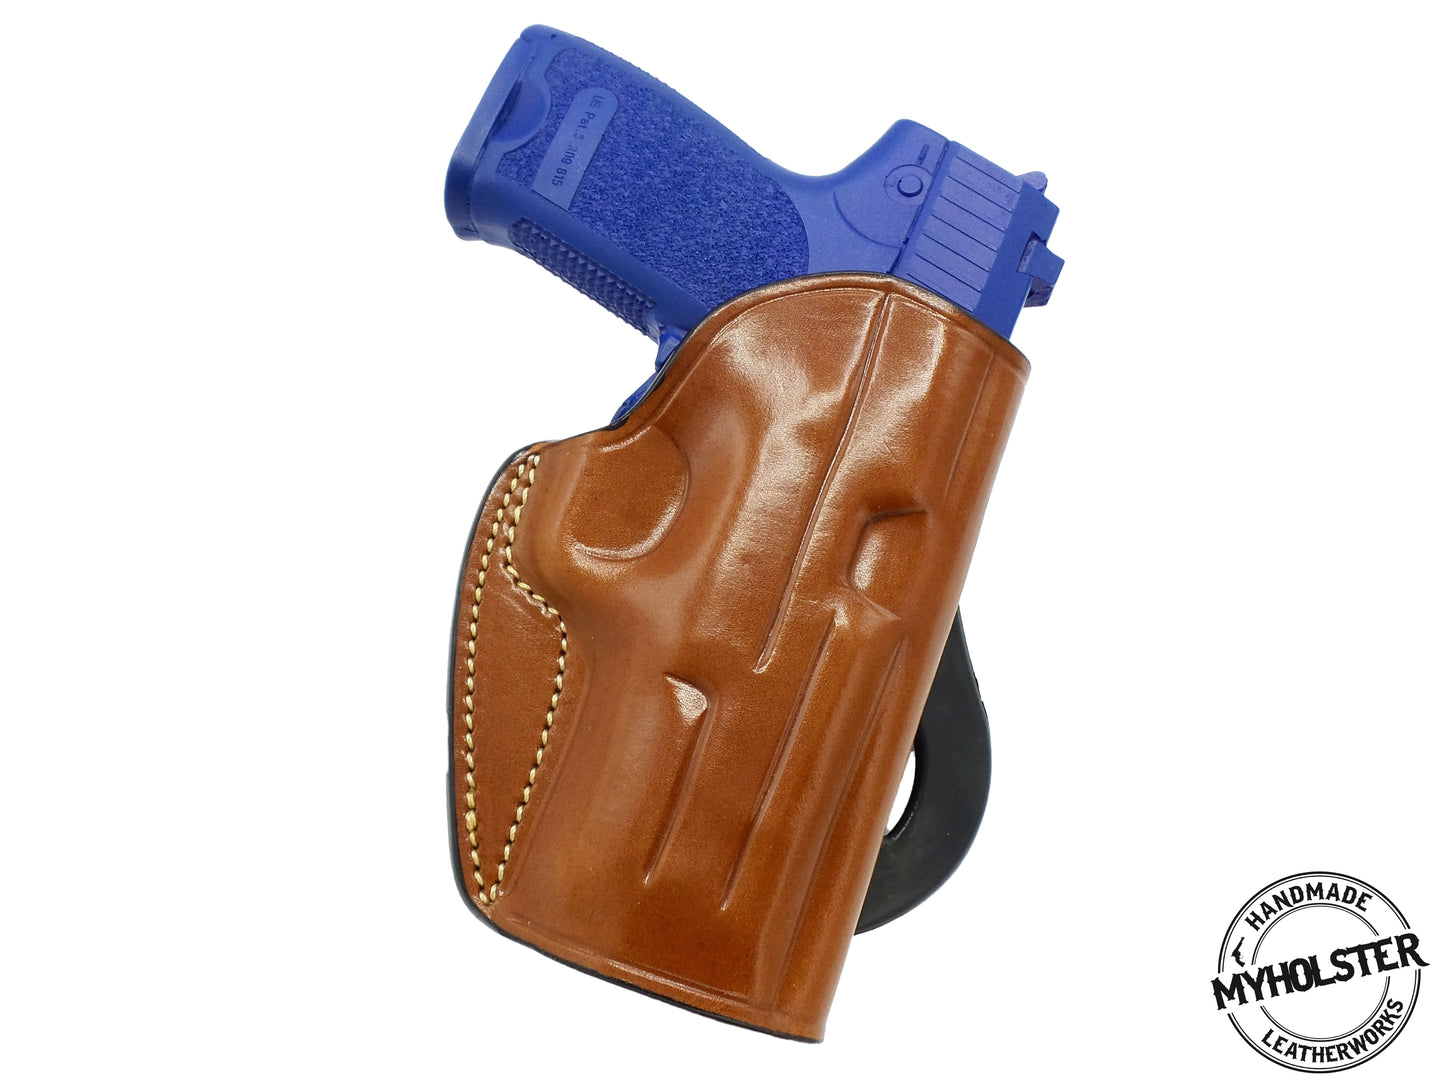 Taurus PT24/7 G2 45ACP OWB Leather Quick Draw Right Hand Paddle Holster - Choose Your Color